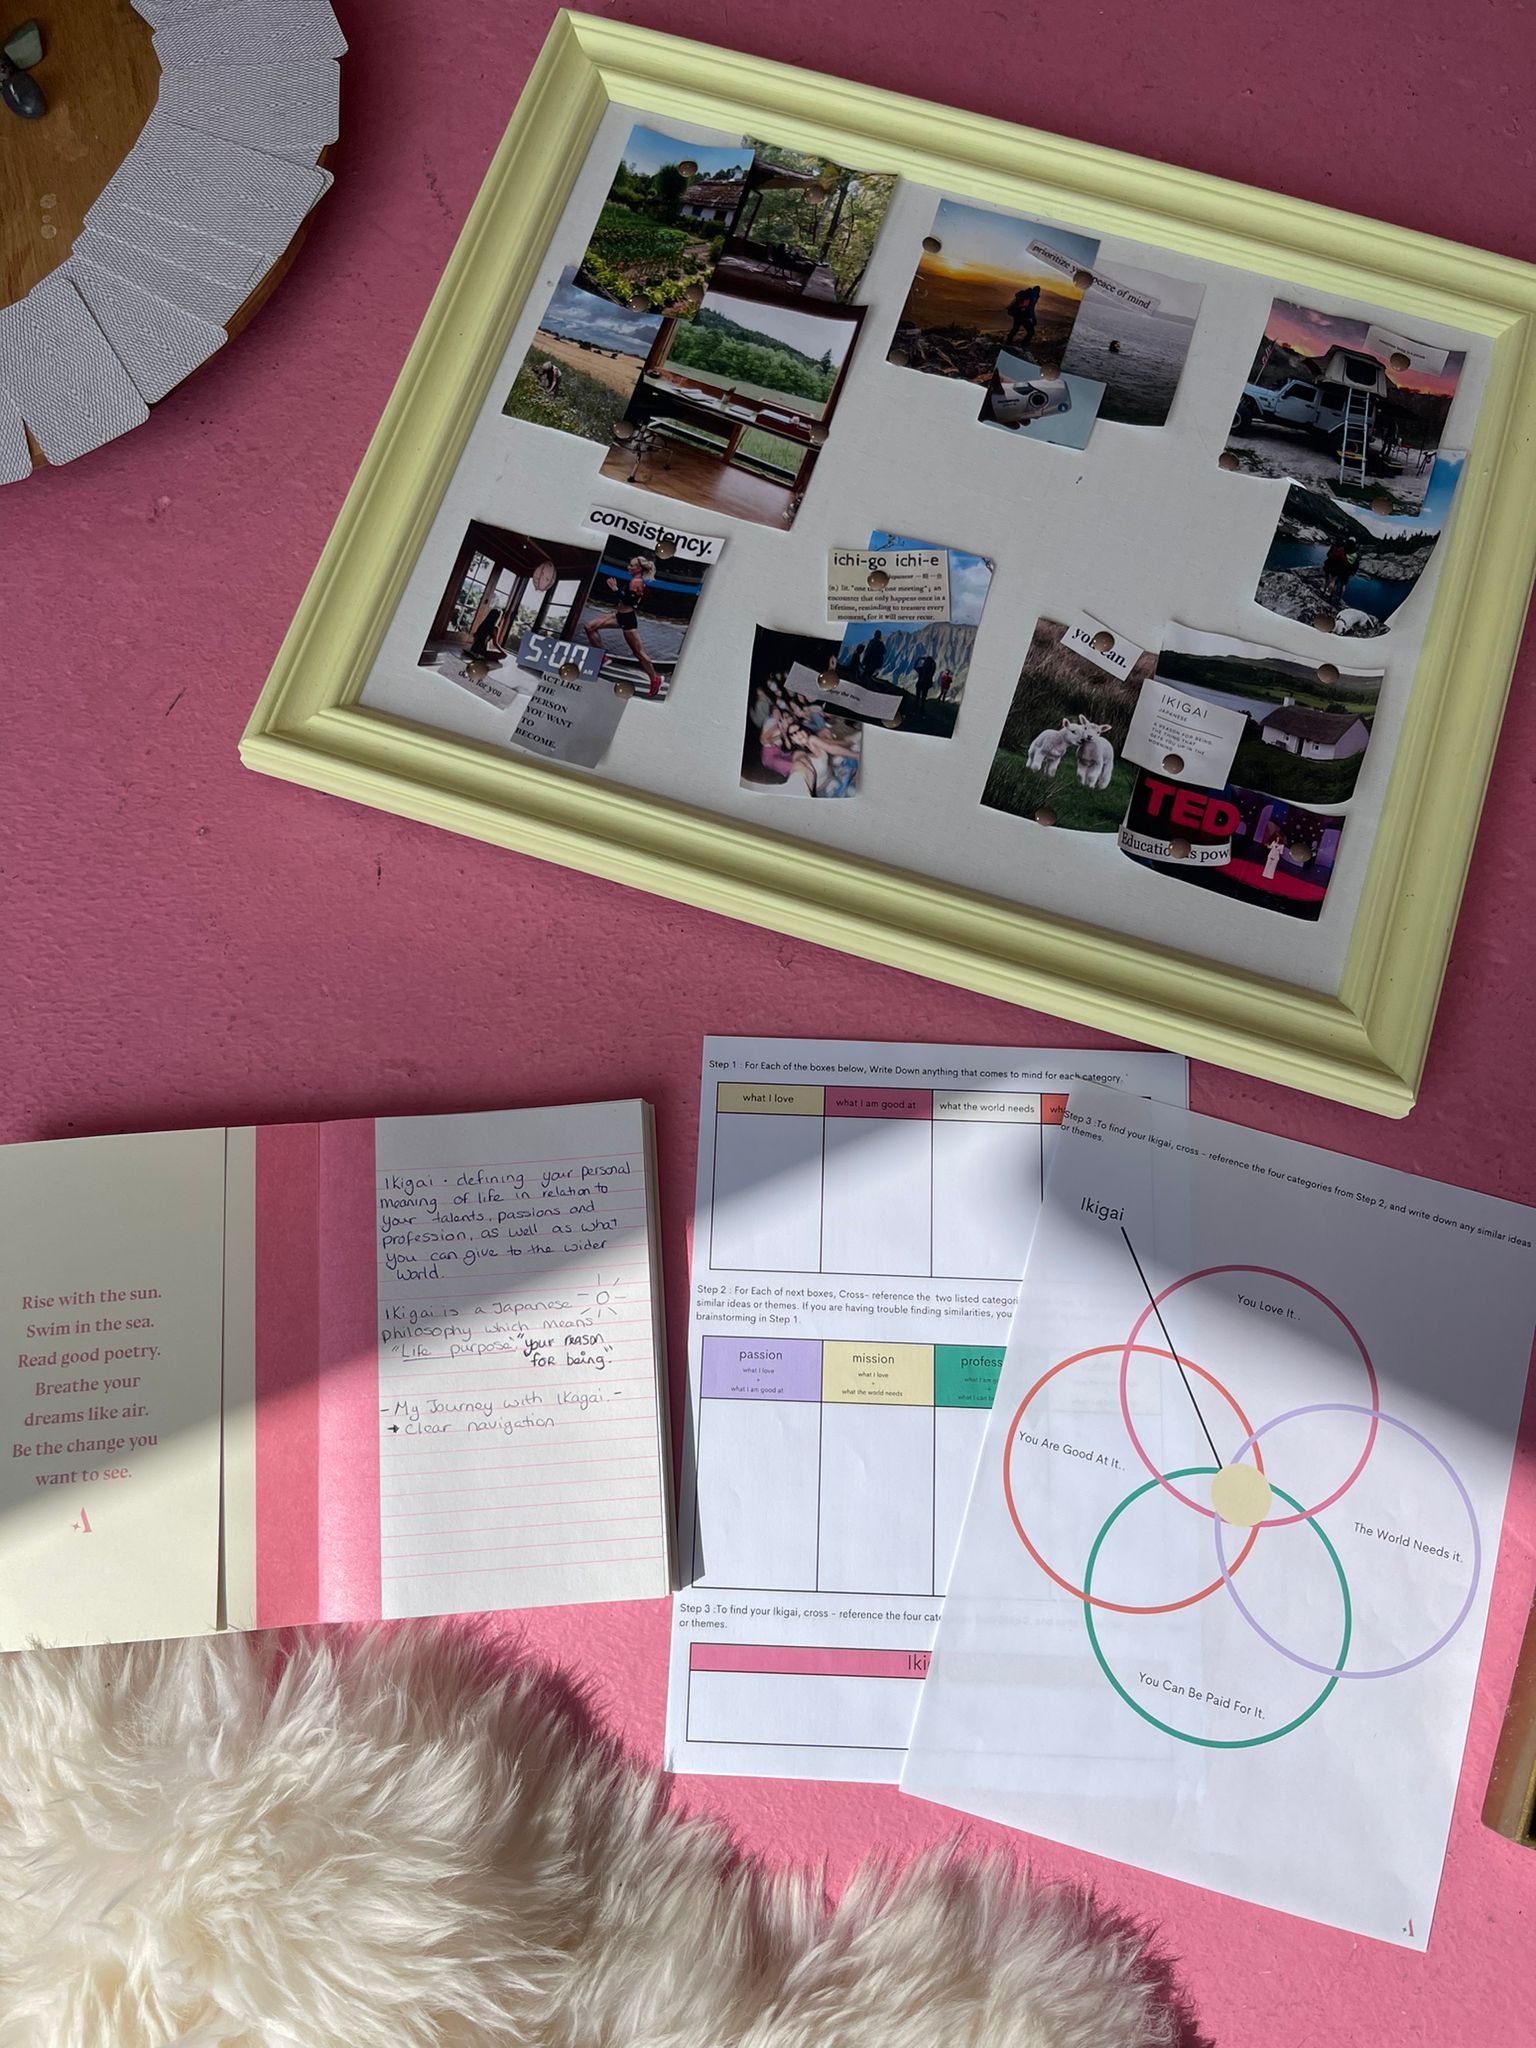 Reconnect | Cacao, Ikagai & Vision Board Workshop - June 1st